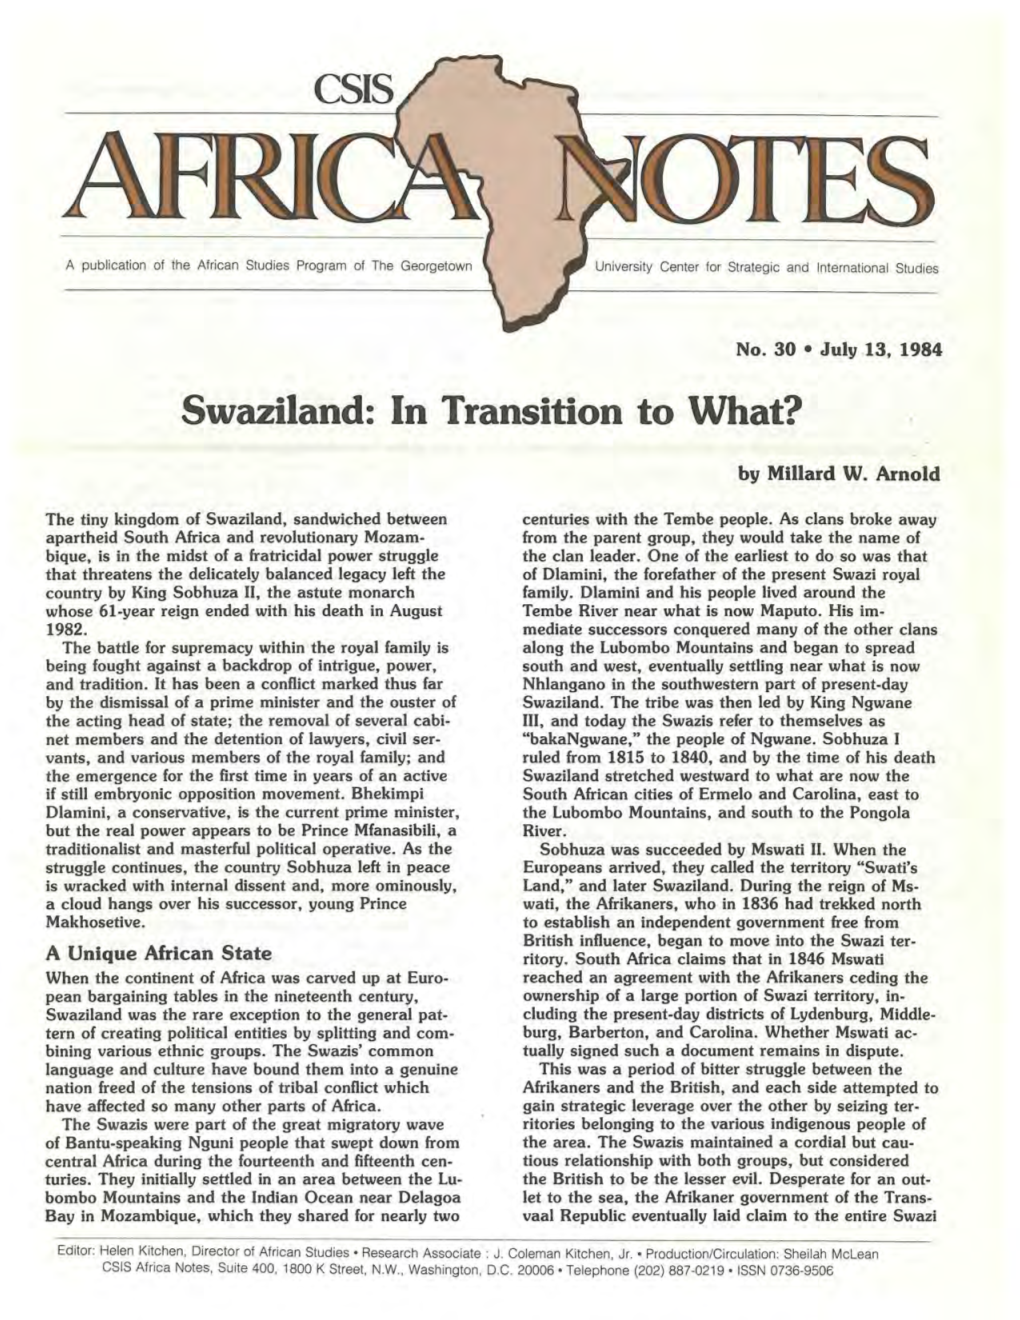 Swaziland: in Transition to What?